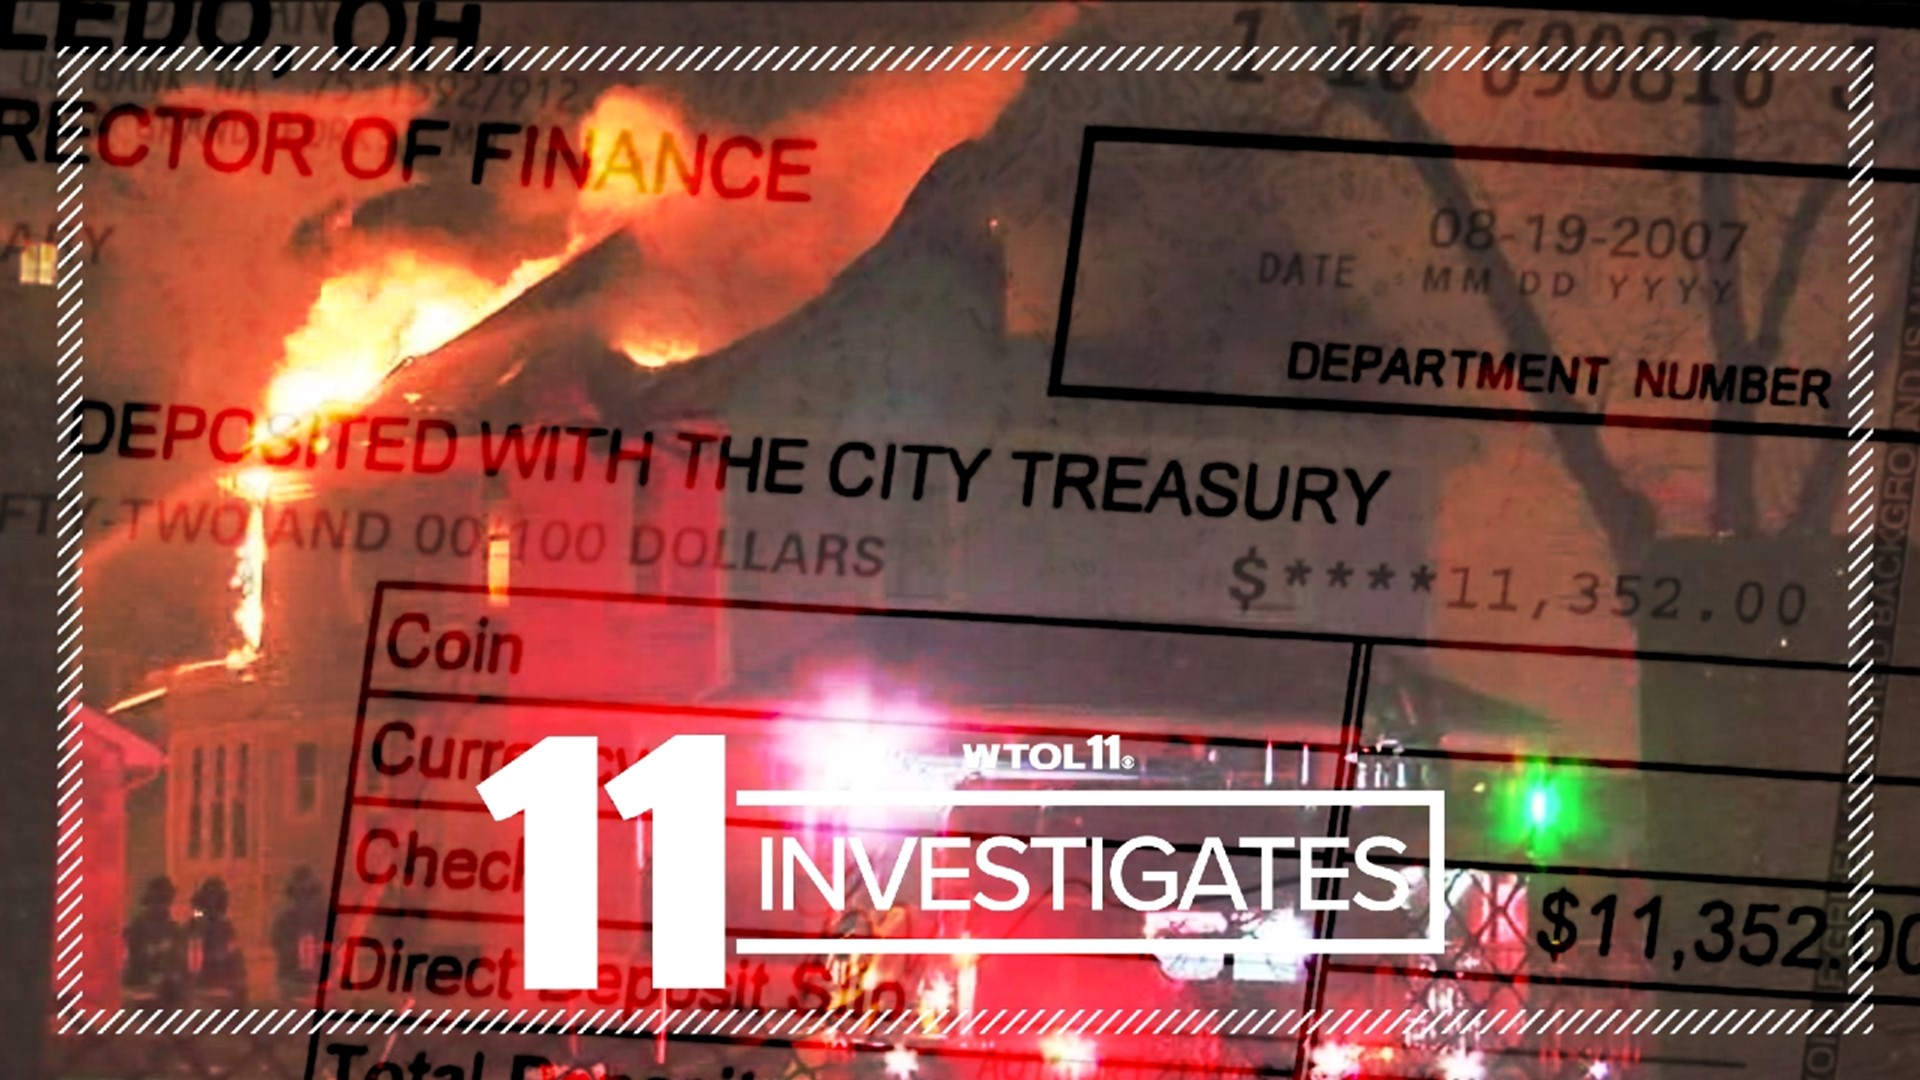 After WTOL 11's reporting on the city of Toledo's fire escrow account, two residents will be refunded more than $25,000.